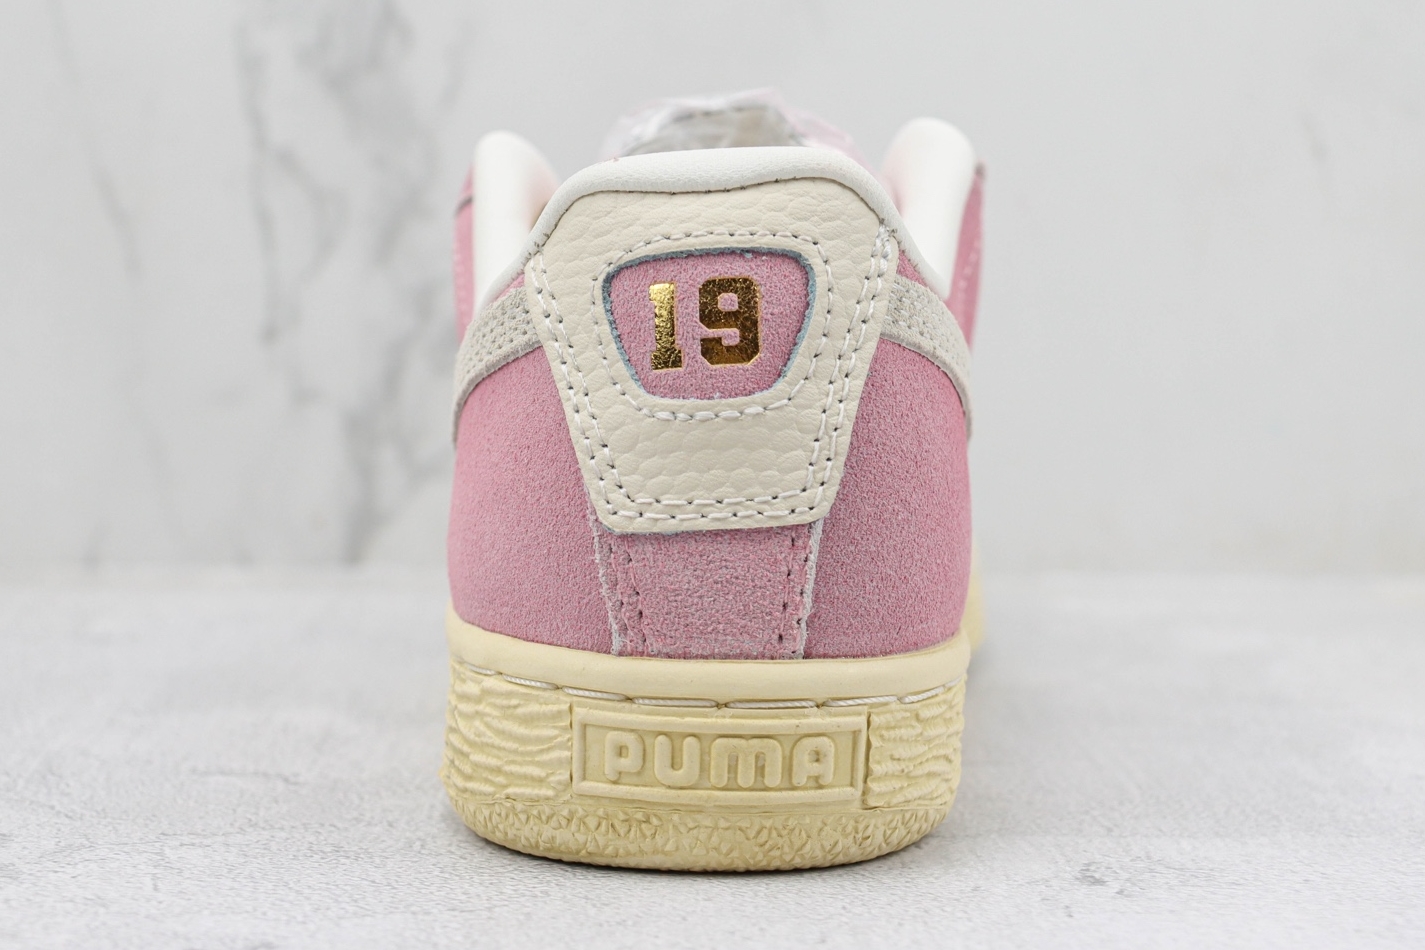 Puma Suede x Rhuigi 'B-Boy' 391333-01 - Classic Style and Exceptional Quality for Modern Trendsetters